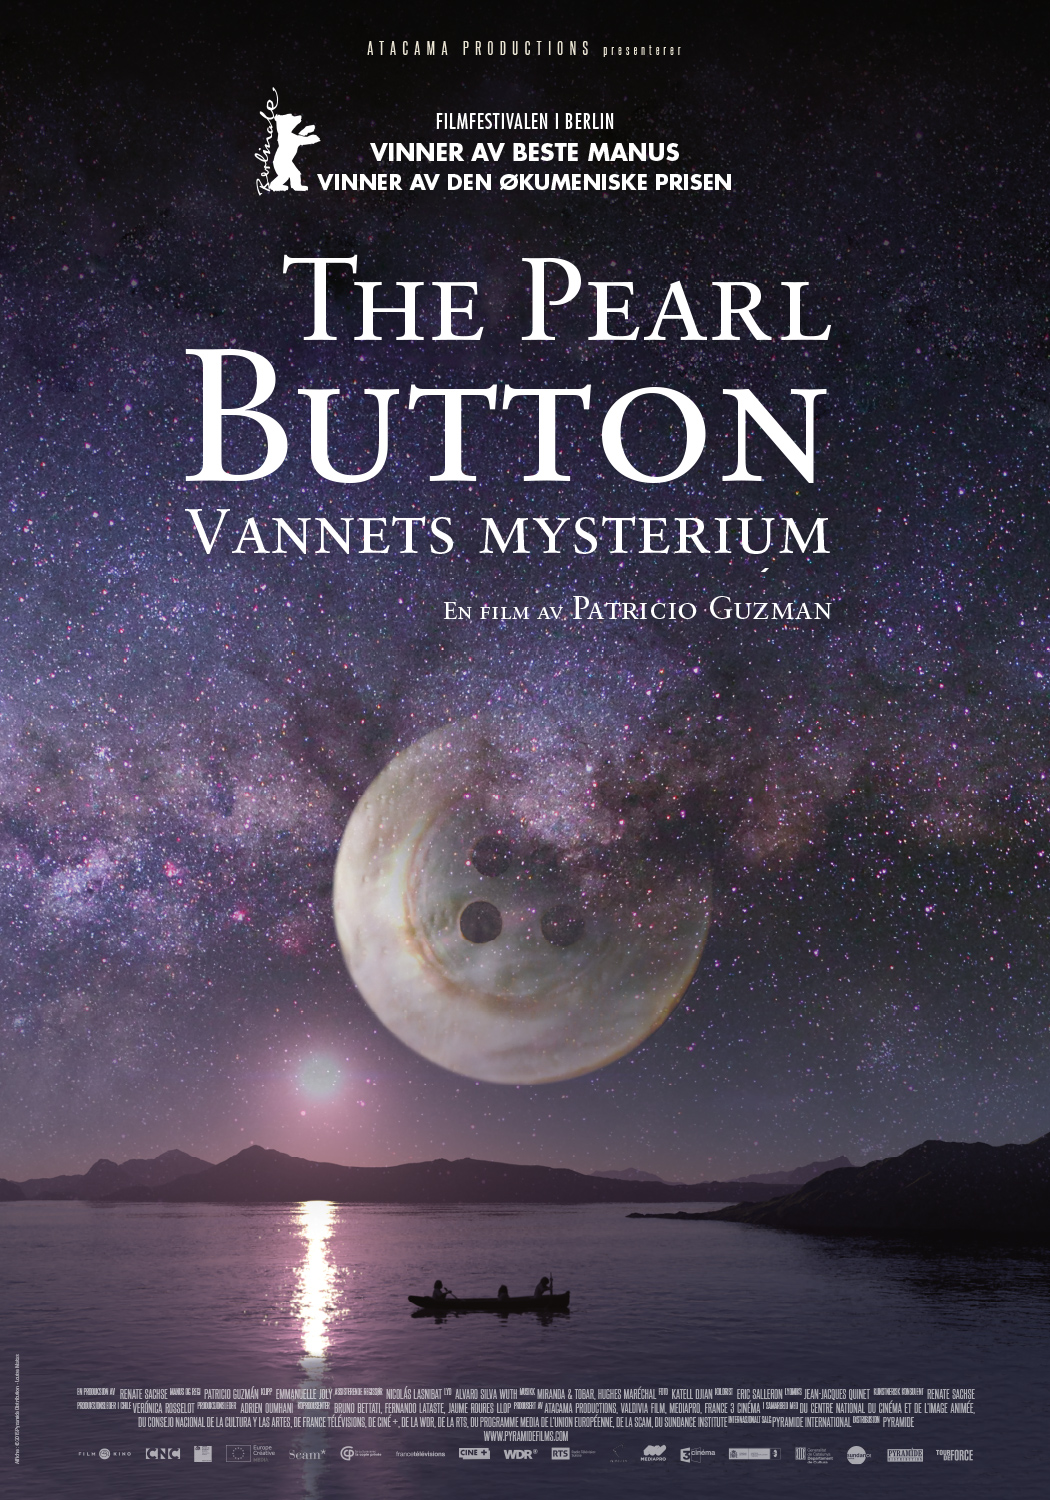 THE PEARL BUTTON